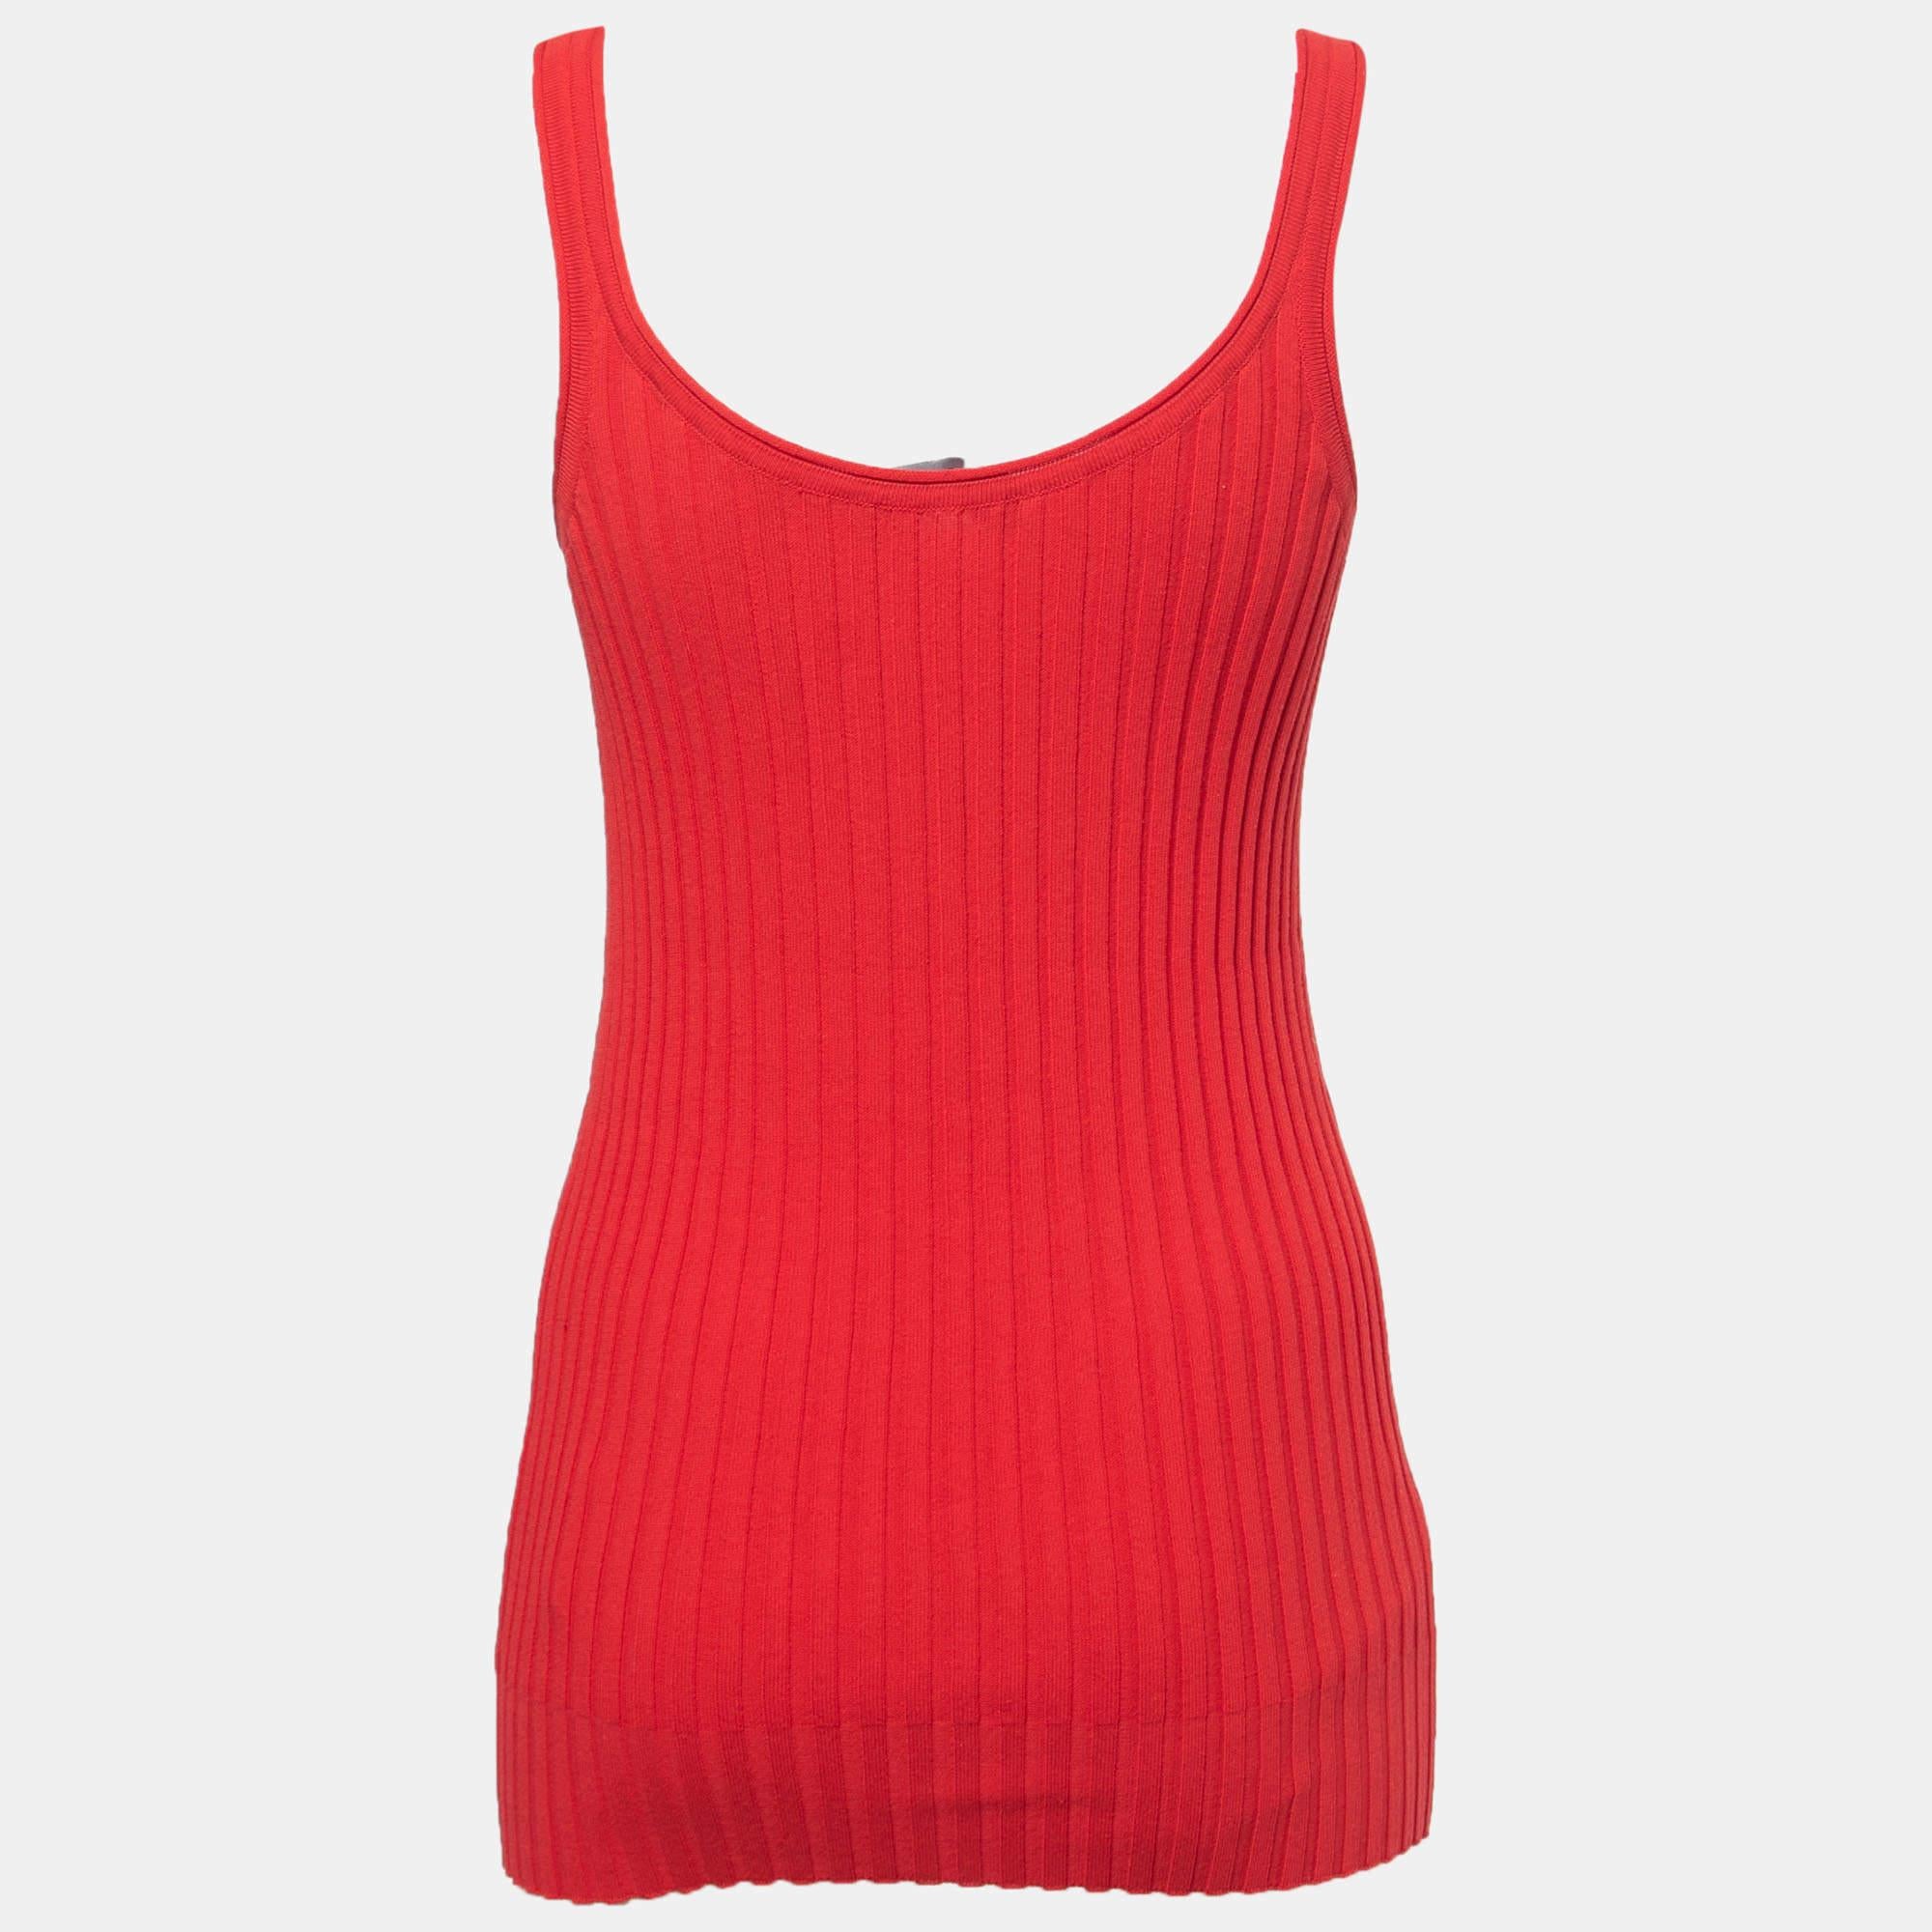 Crafted from high-quality cotton, it features a flattering ribbed knit texture and a vibrant red hue. The tank top offers a slim fit, making it perfect for layering or wearing on its own, adding a touch of Italian luxury to any outfit.

